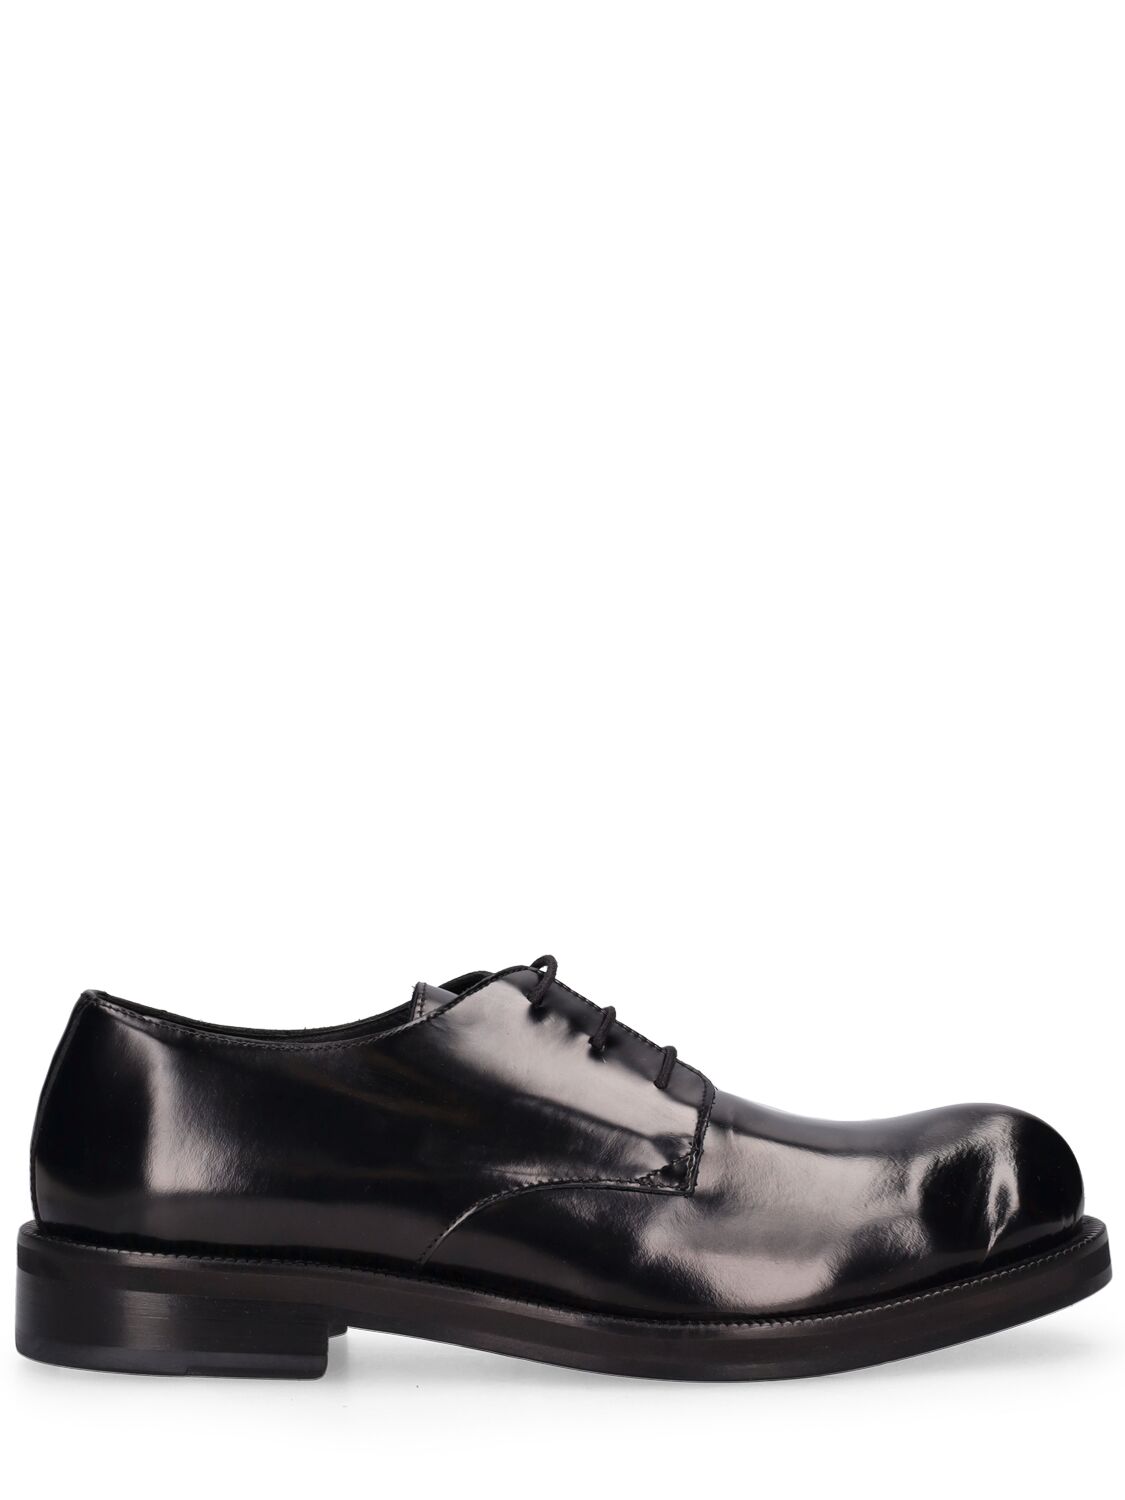 Berby Leather Lace Up Shoes